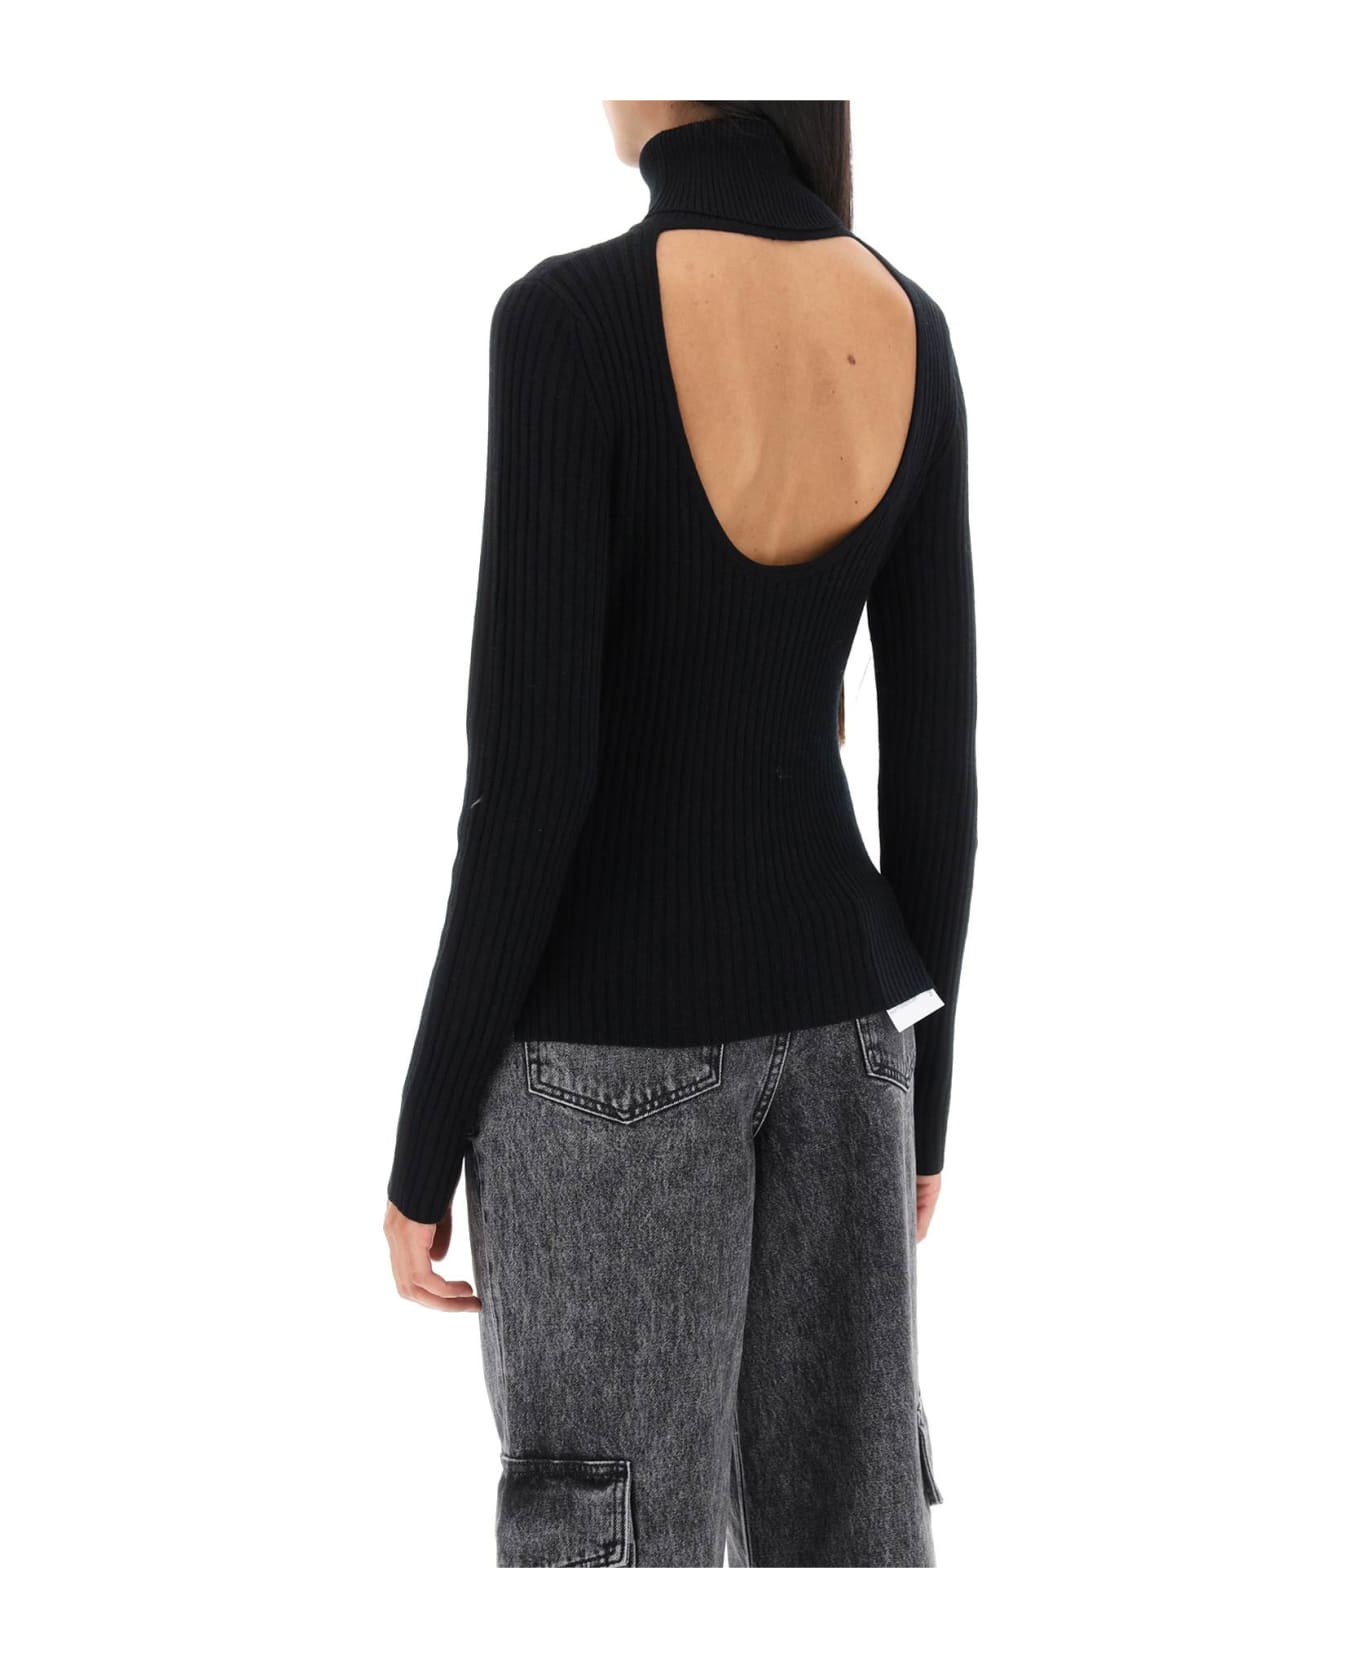 Ganni Turtleneck Sweater With Back Cut Out - BLACK